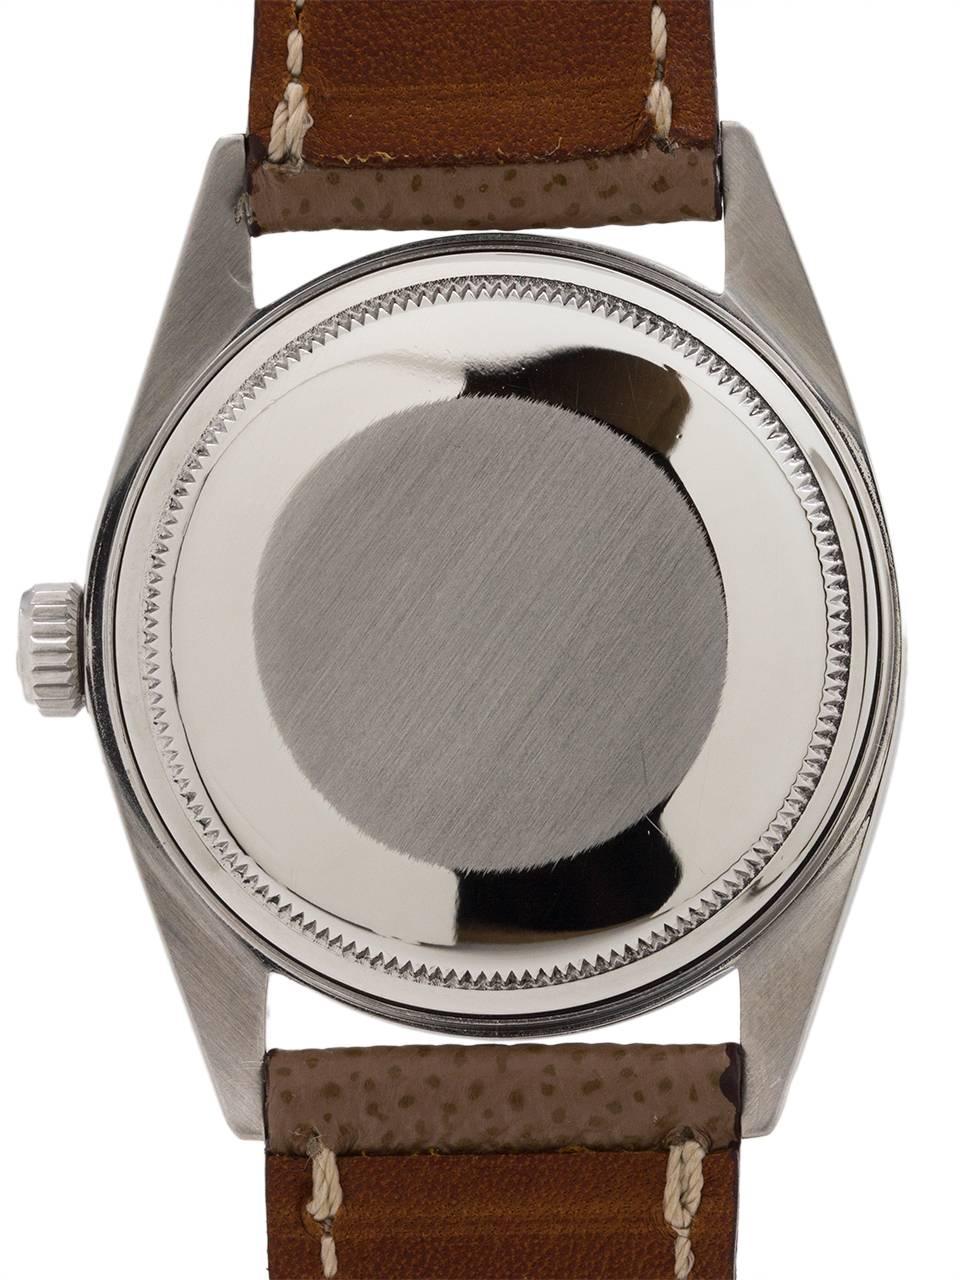 Men's Rolex stainless steel Datejust Smooth Bezel Taupe Dial wristwatch, circa 1971